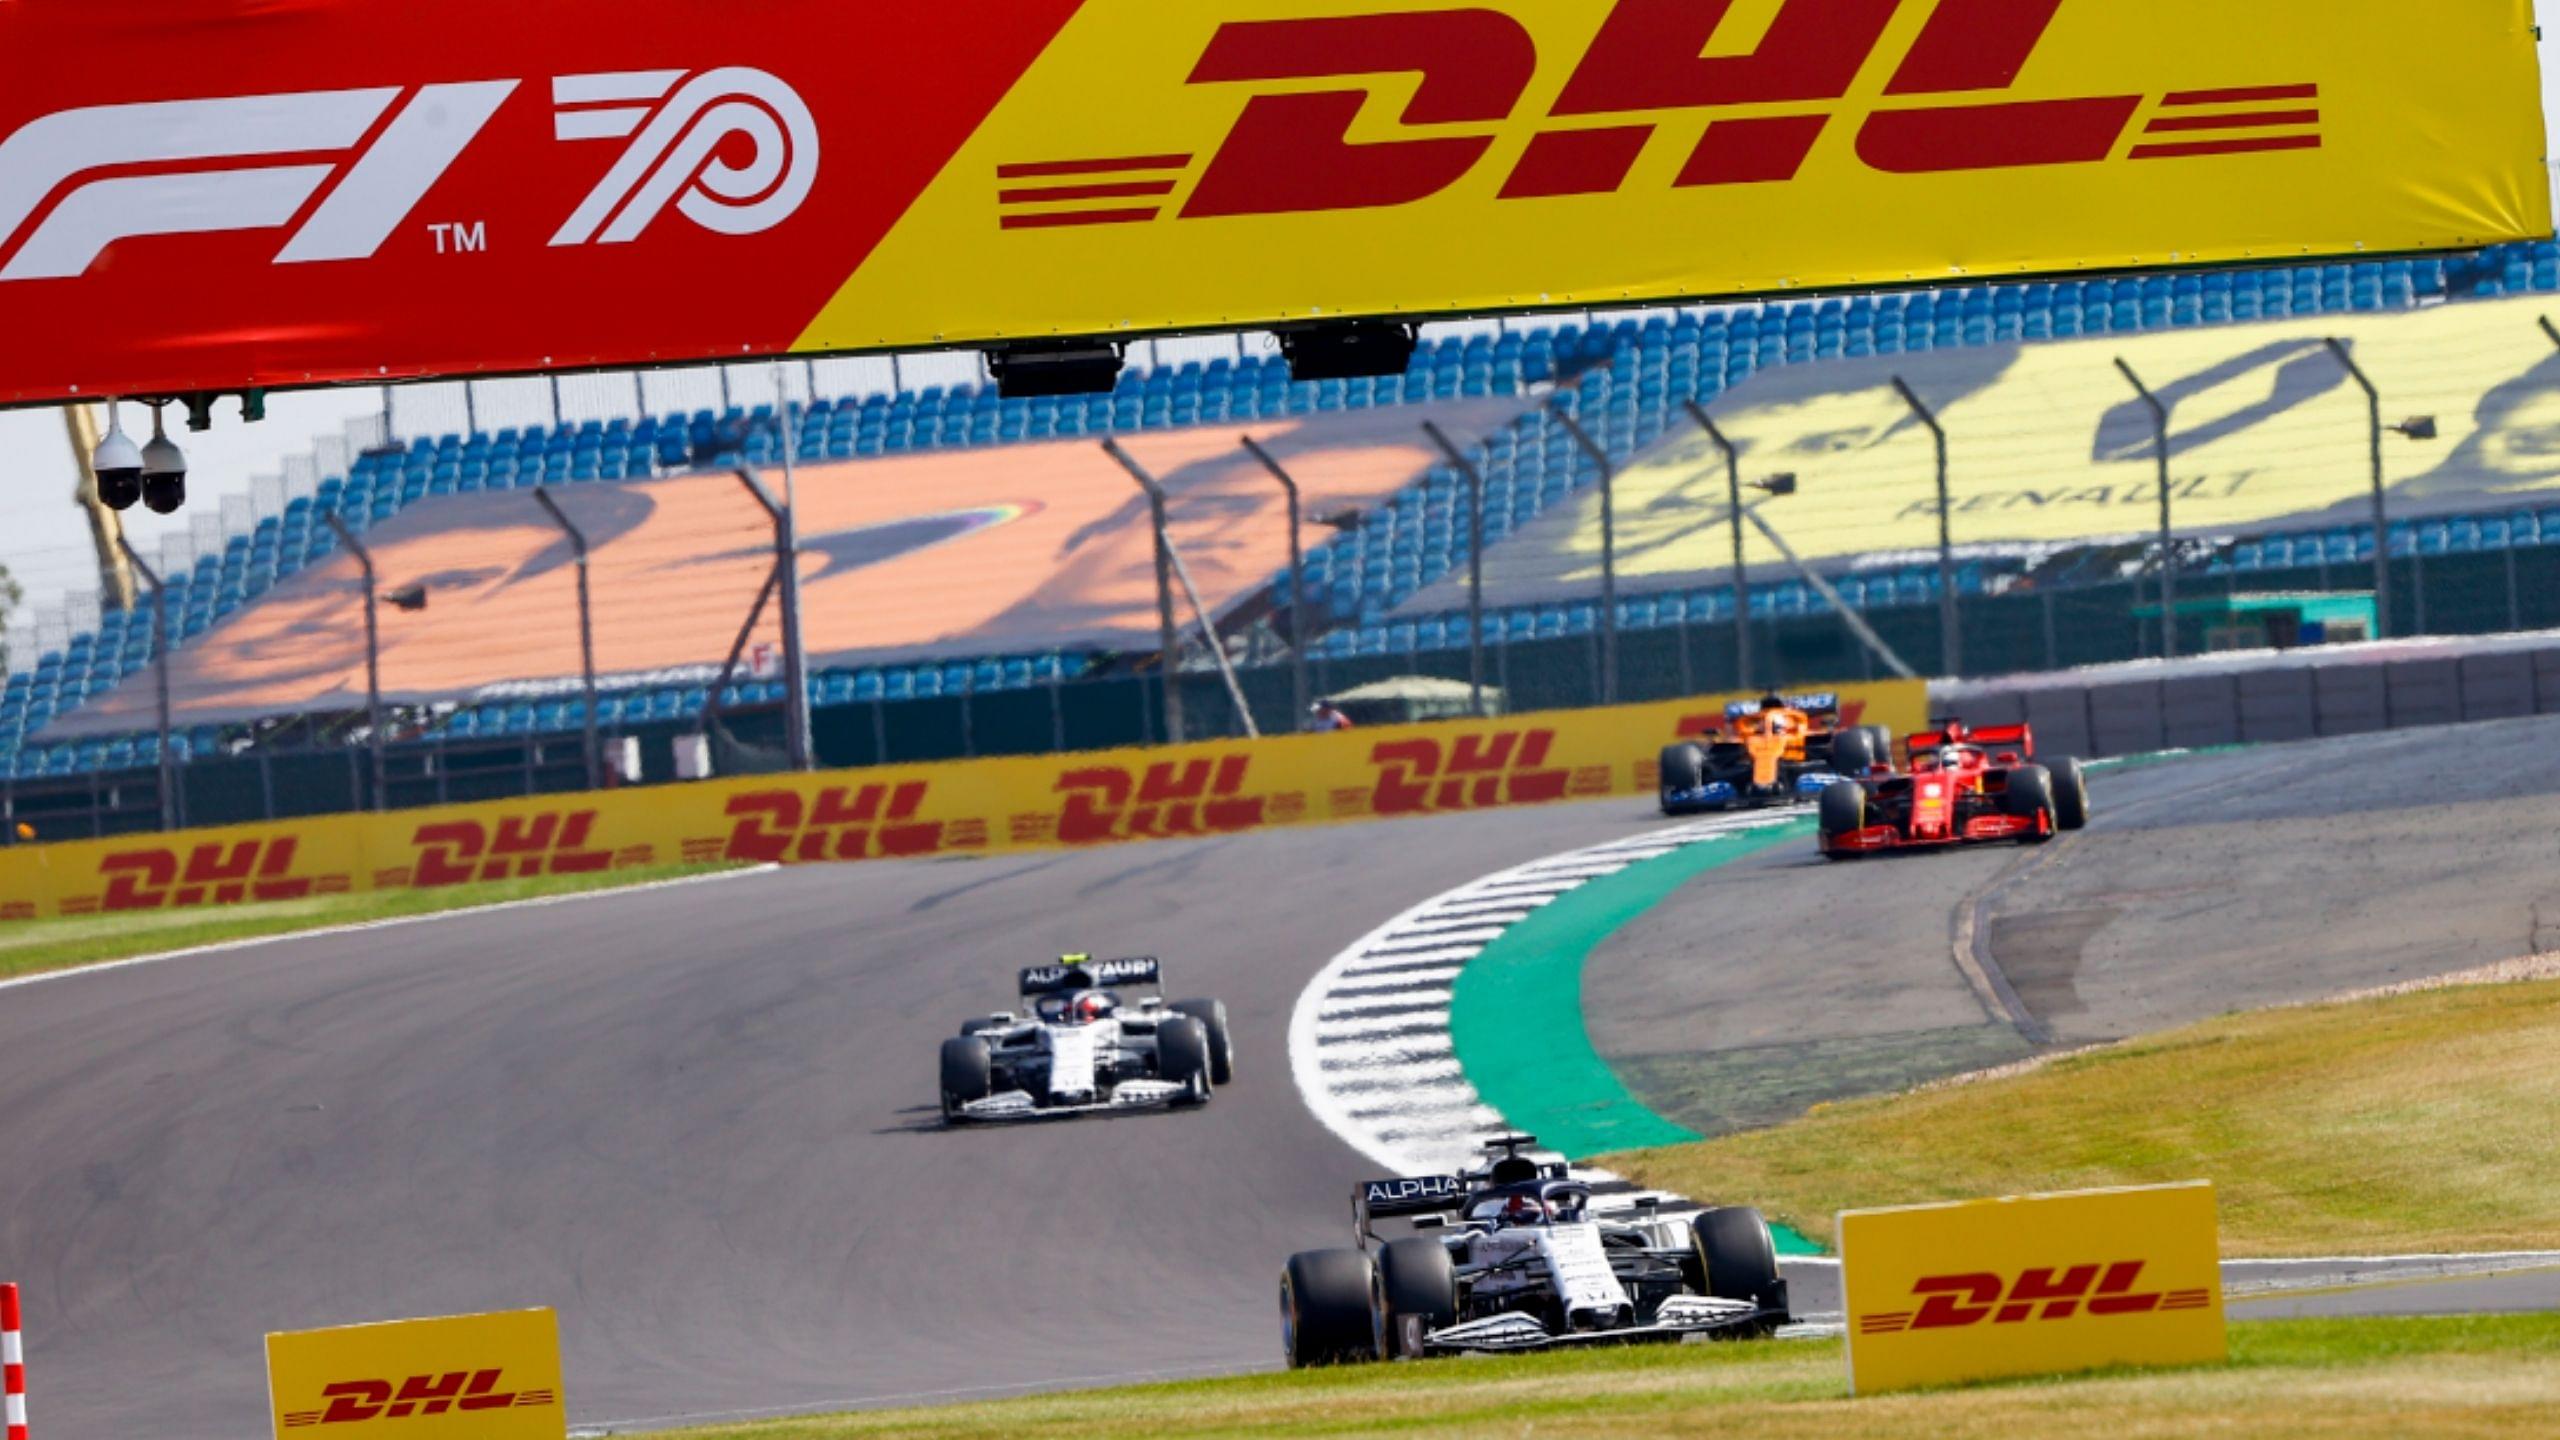 "We are looking forward to defending our title" - Formula 1 renews longest-standing Global Partnership with DHL